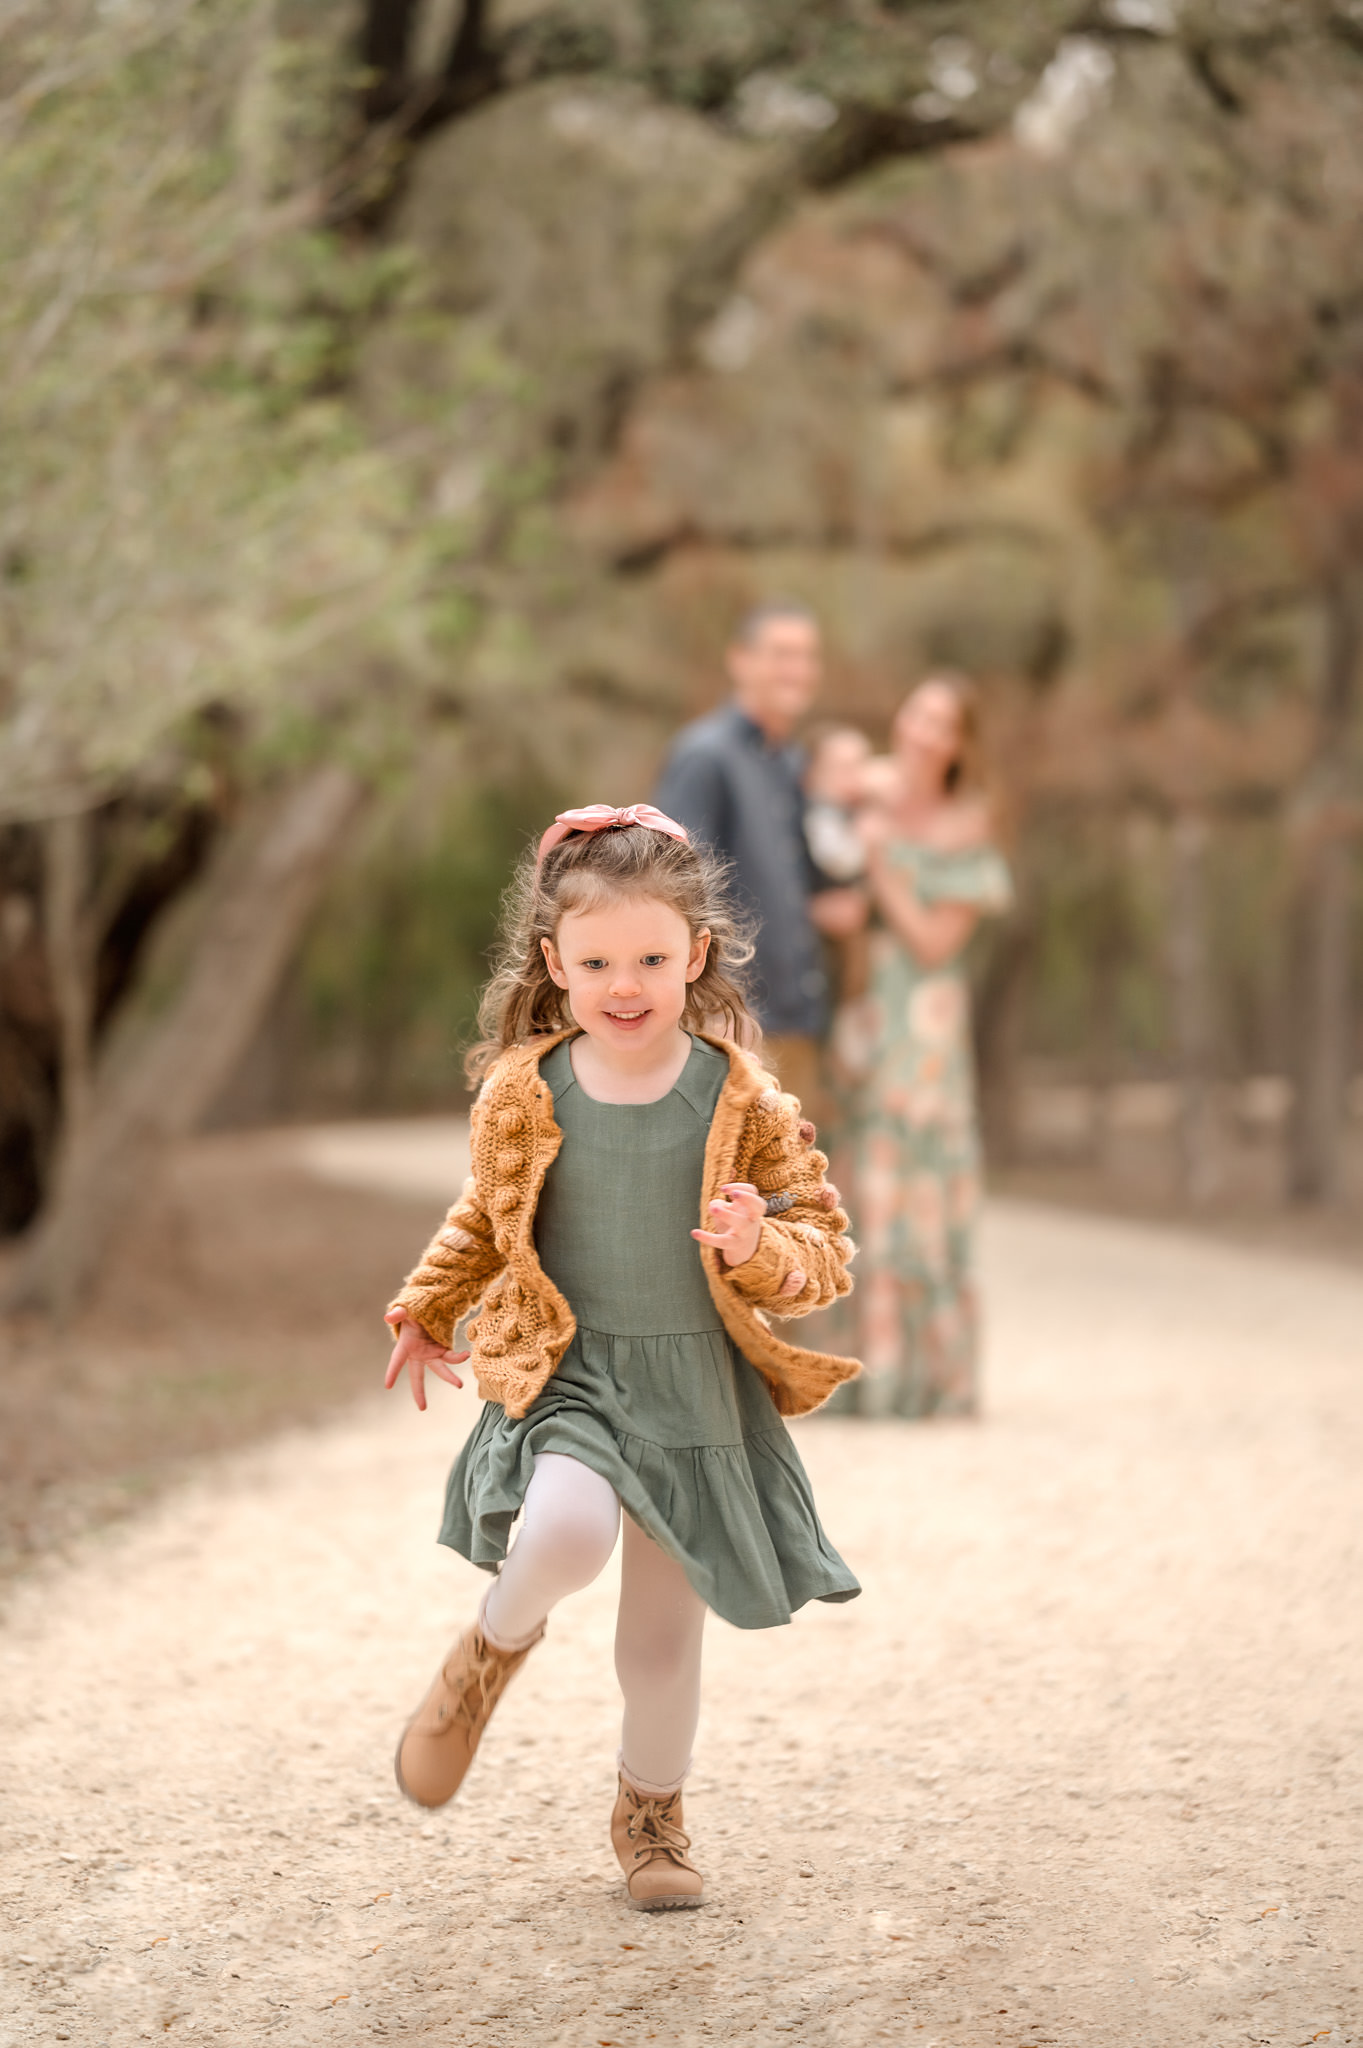 A young girl in a green dress and sweater runs down a park path as her parents watch once upon a child san antonio